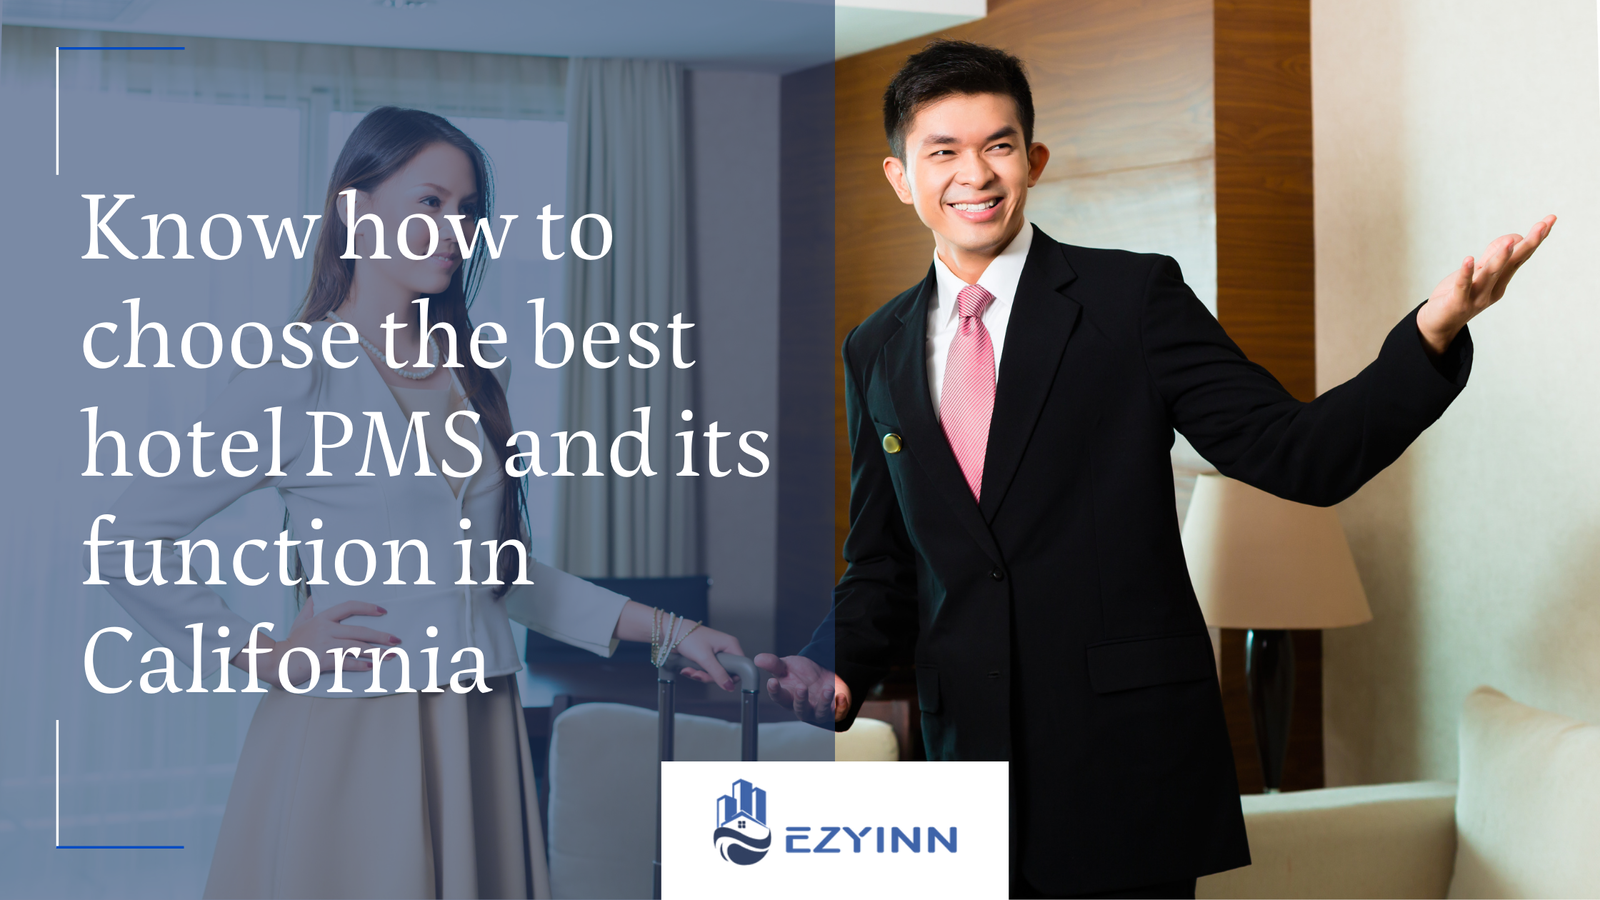 Know how to choose the best hotel PMS and its function in California | ezyinn PMS